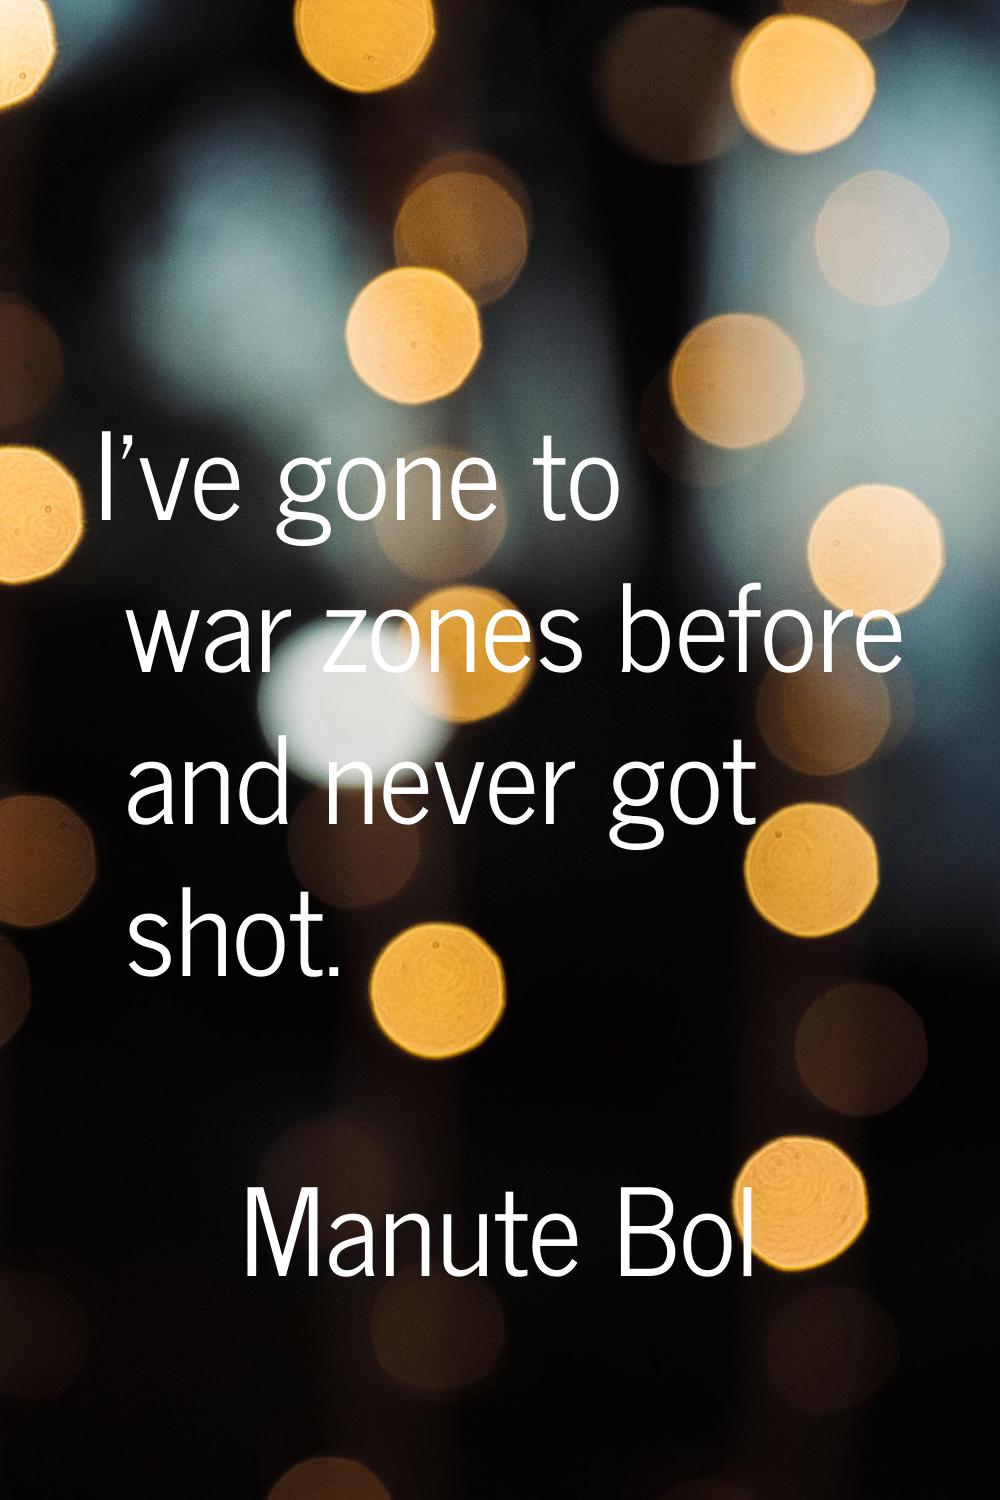 I've gone to war zones before and never got shot.